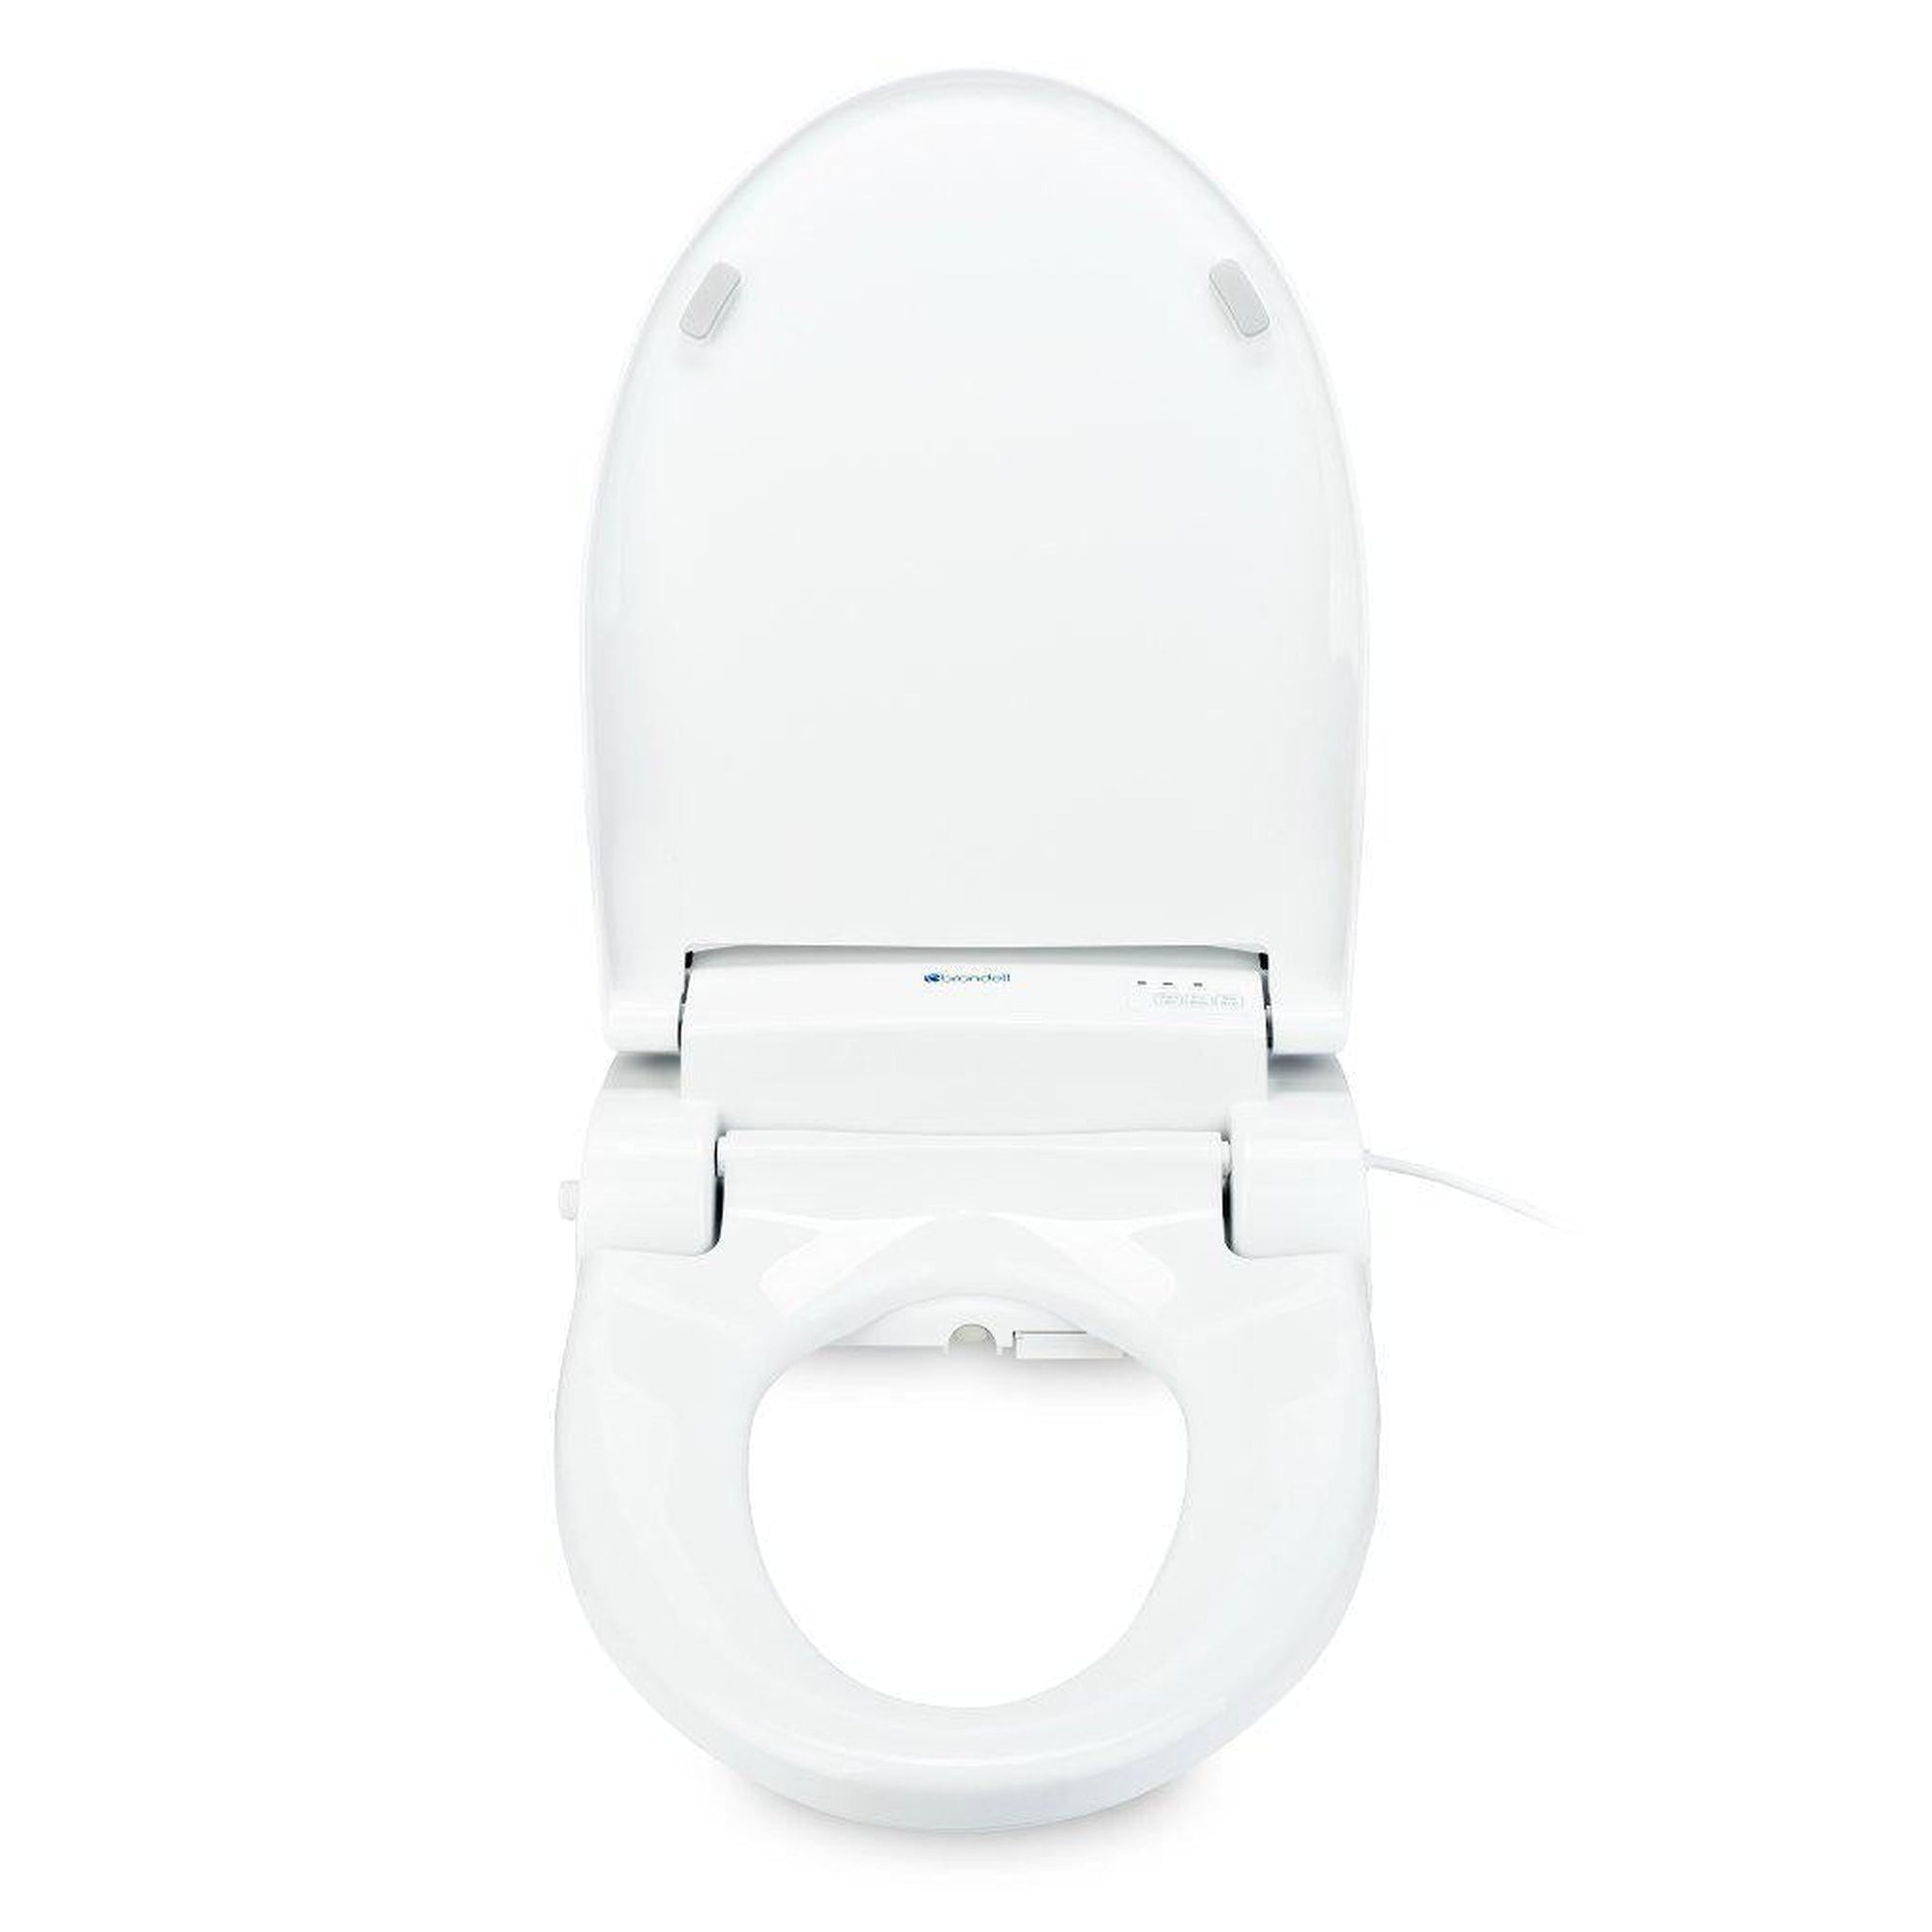 https://usbathstore.com/cdn/shop/products/Brondell-Swash-DS725-19_5-White-Round-Electric-Advanced-Bidet-Toilet-Seat-With-Wireless-Remote-Control-5.jpg?v=1657707440&width=1946